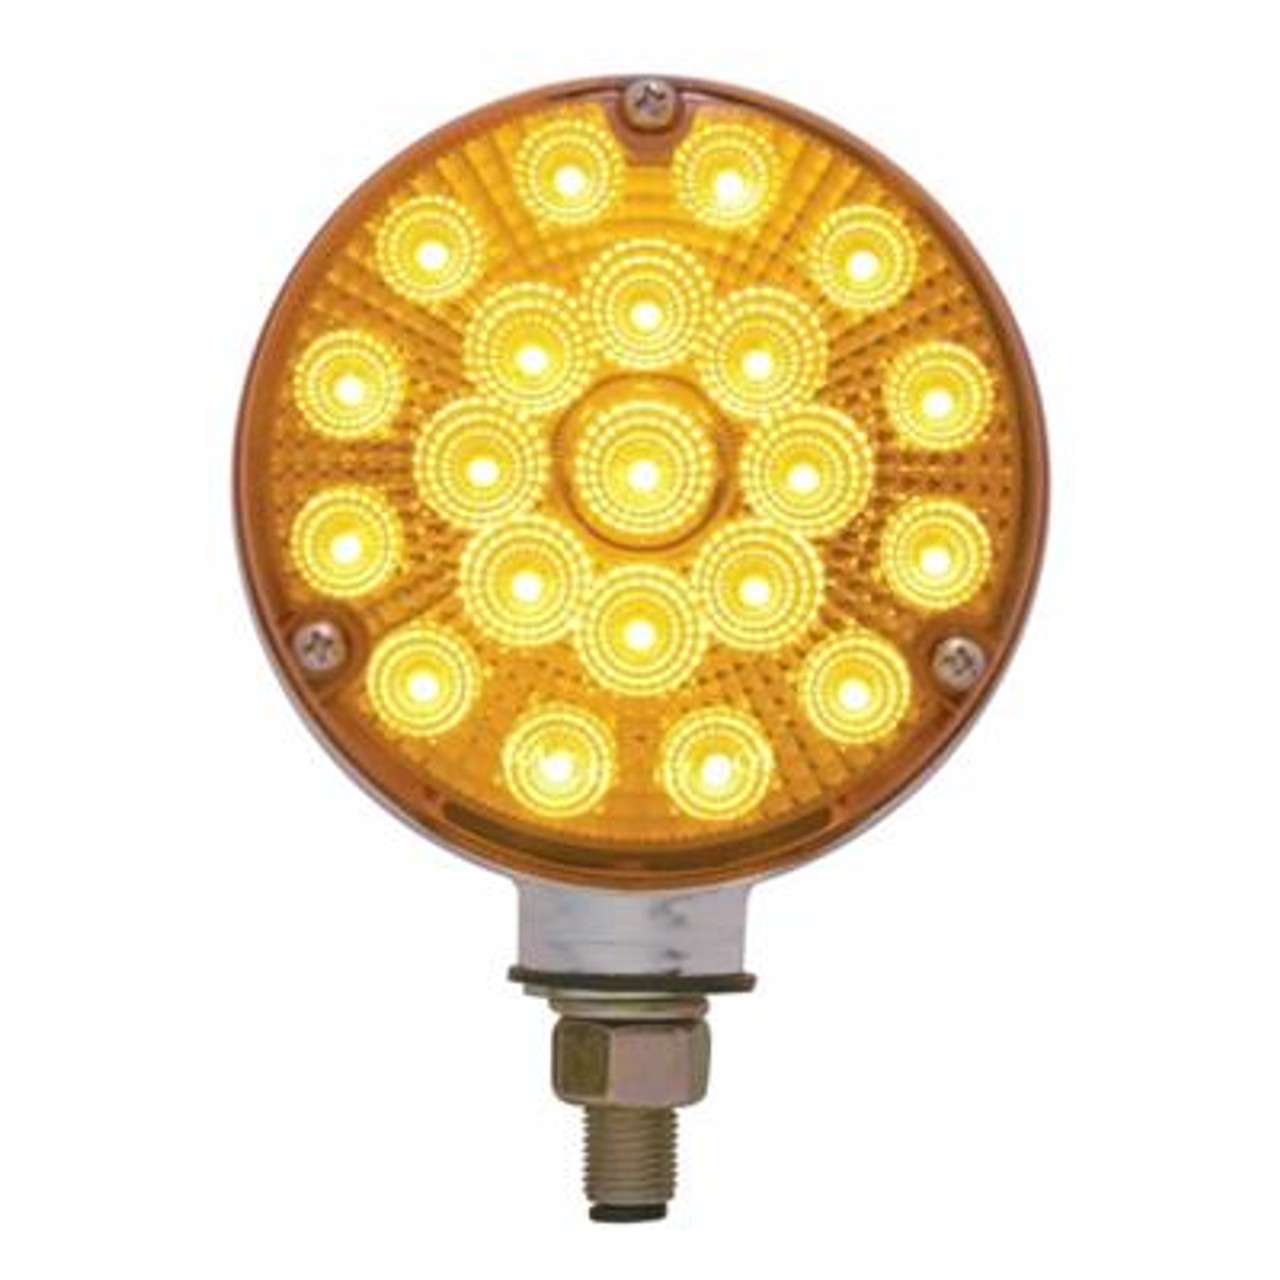 42 LED Reflector Double Face Turn Signal Light - Amber & Red LED/Amber & Red Lens